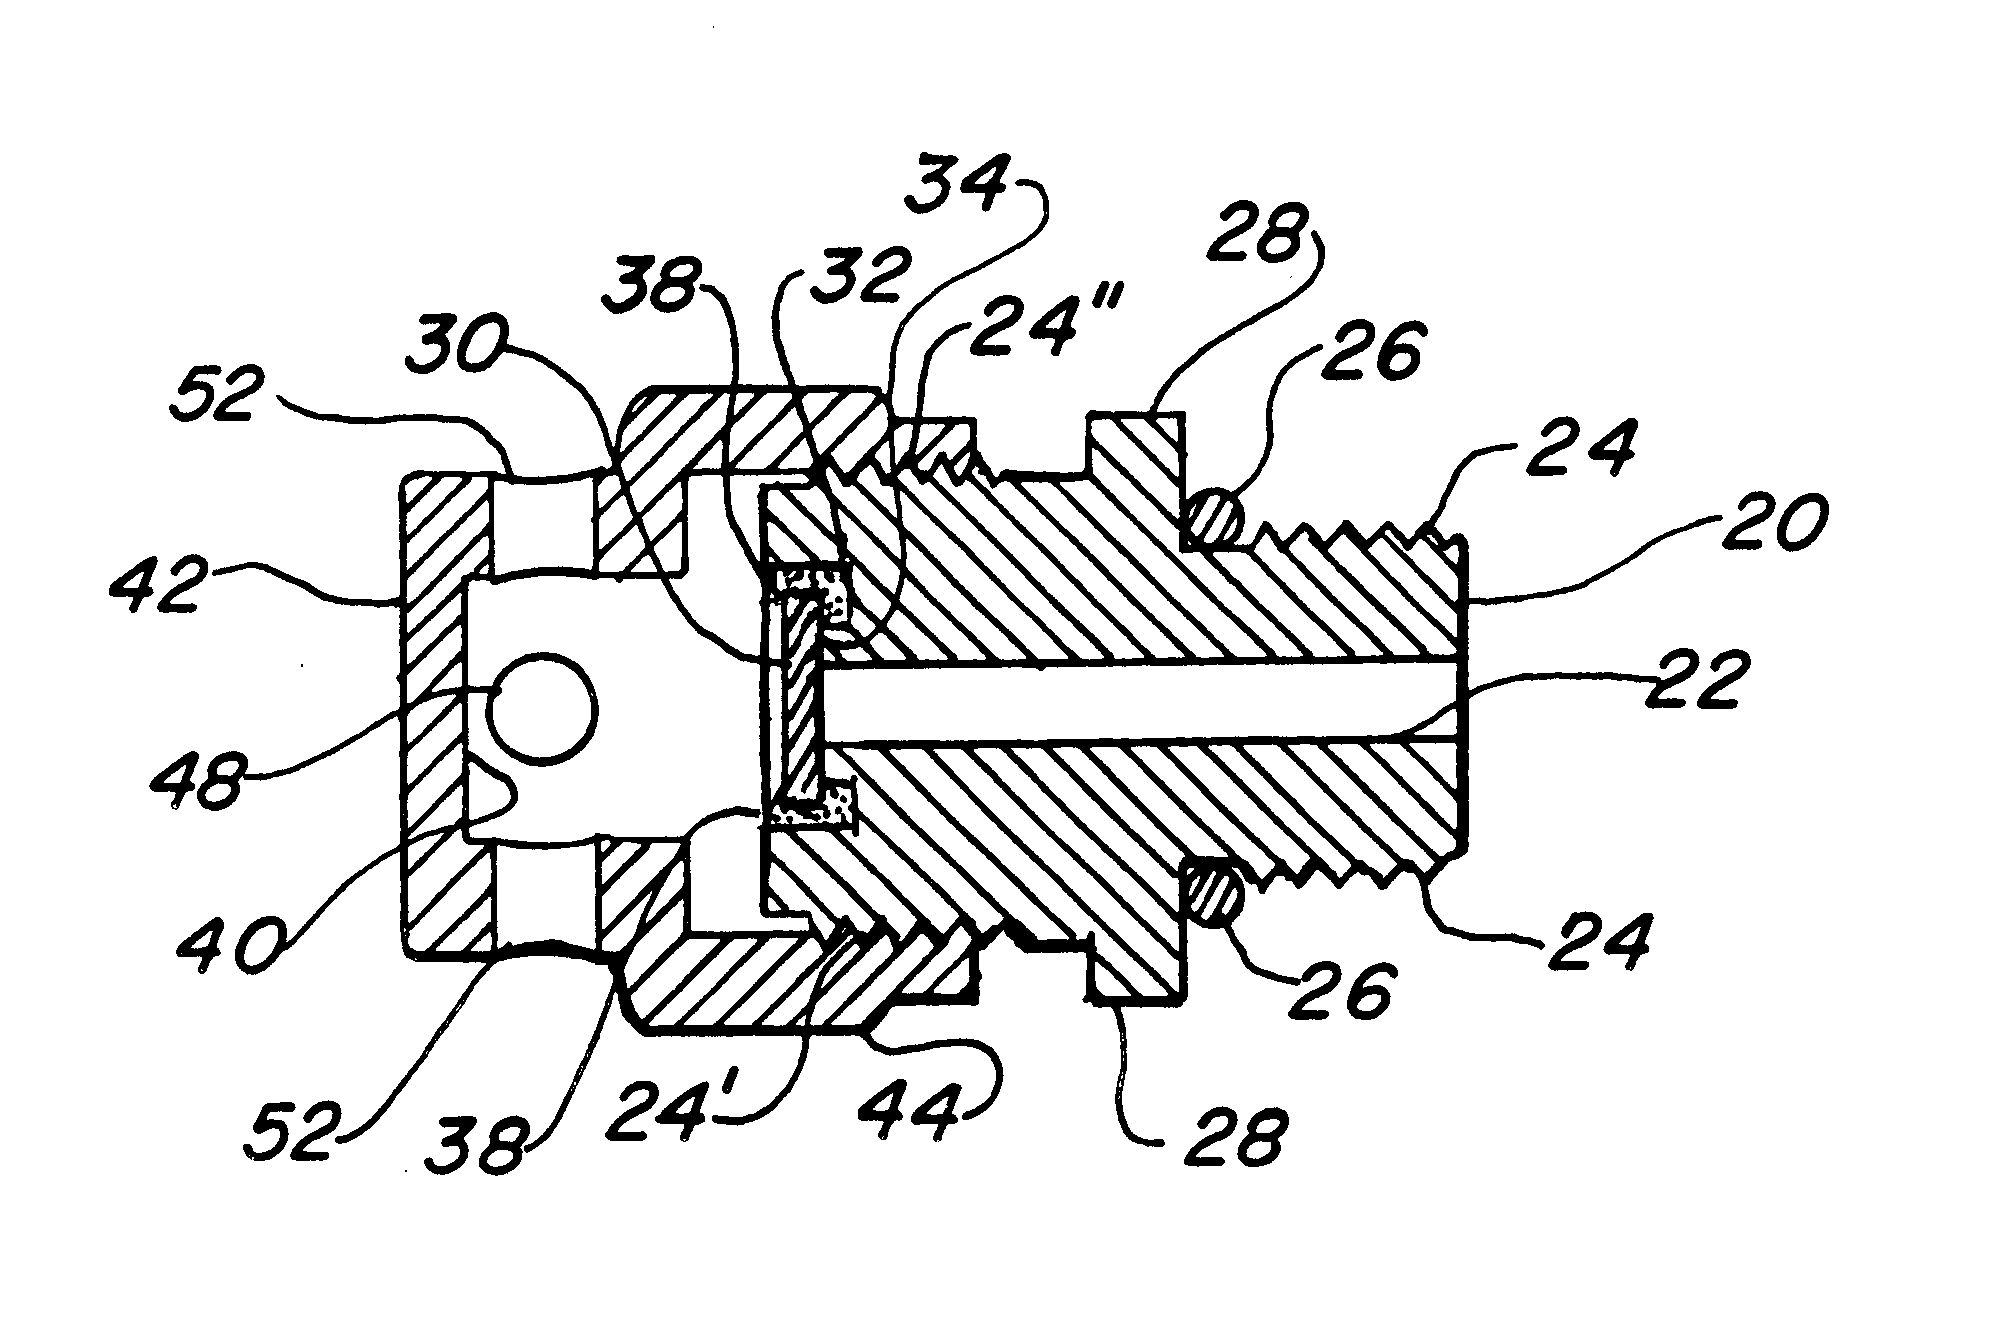 Thermal-pressure relief device